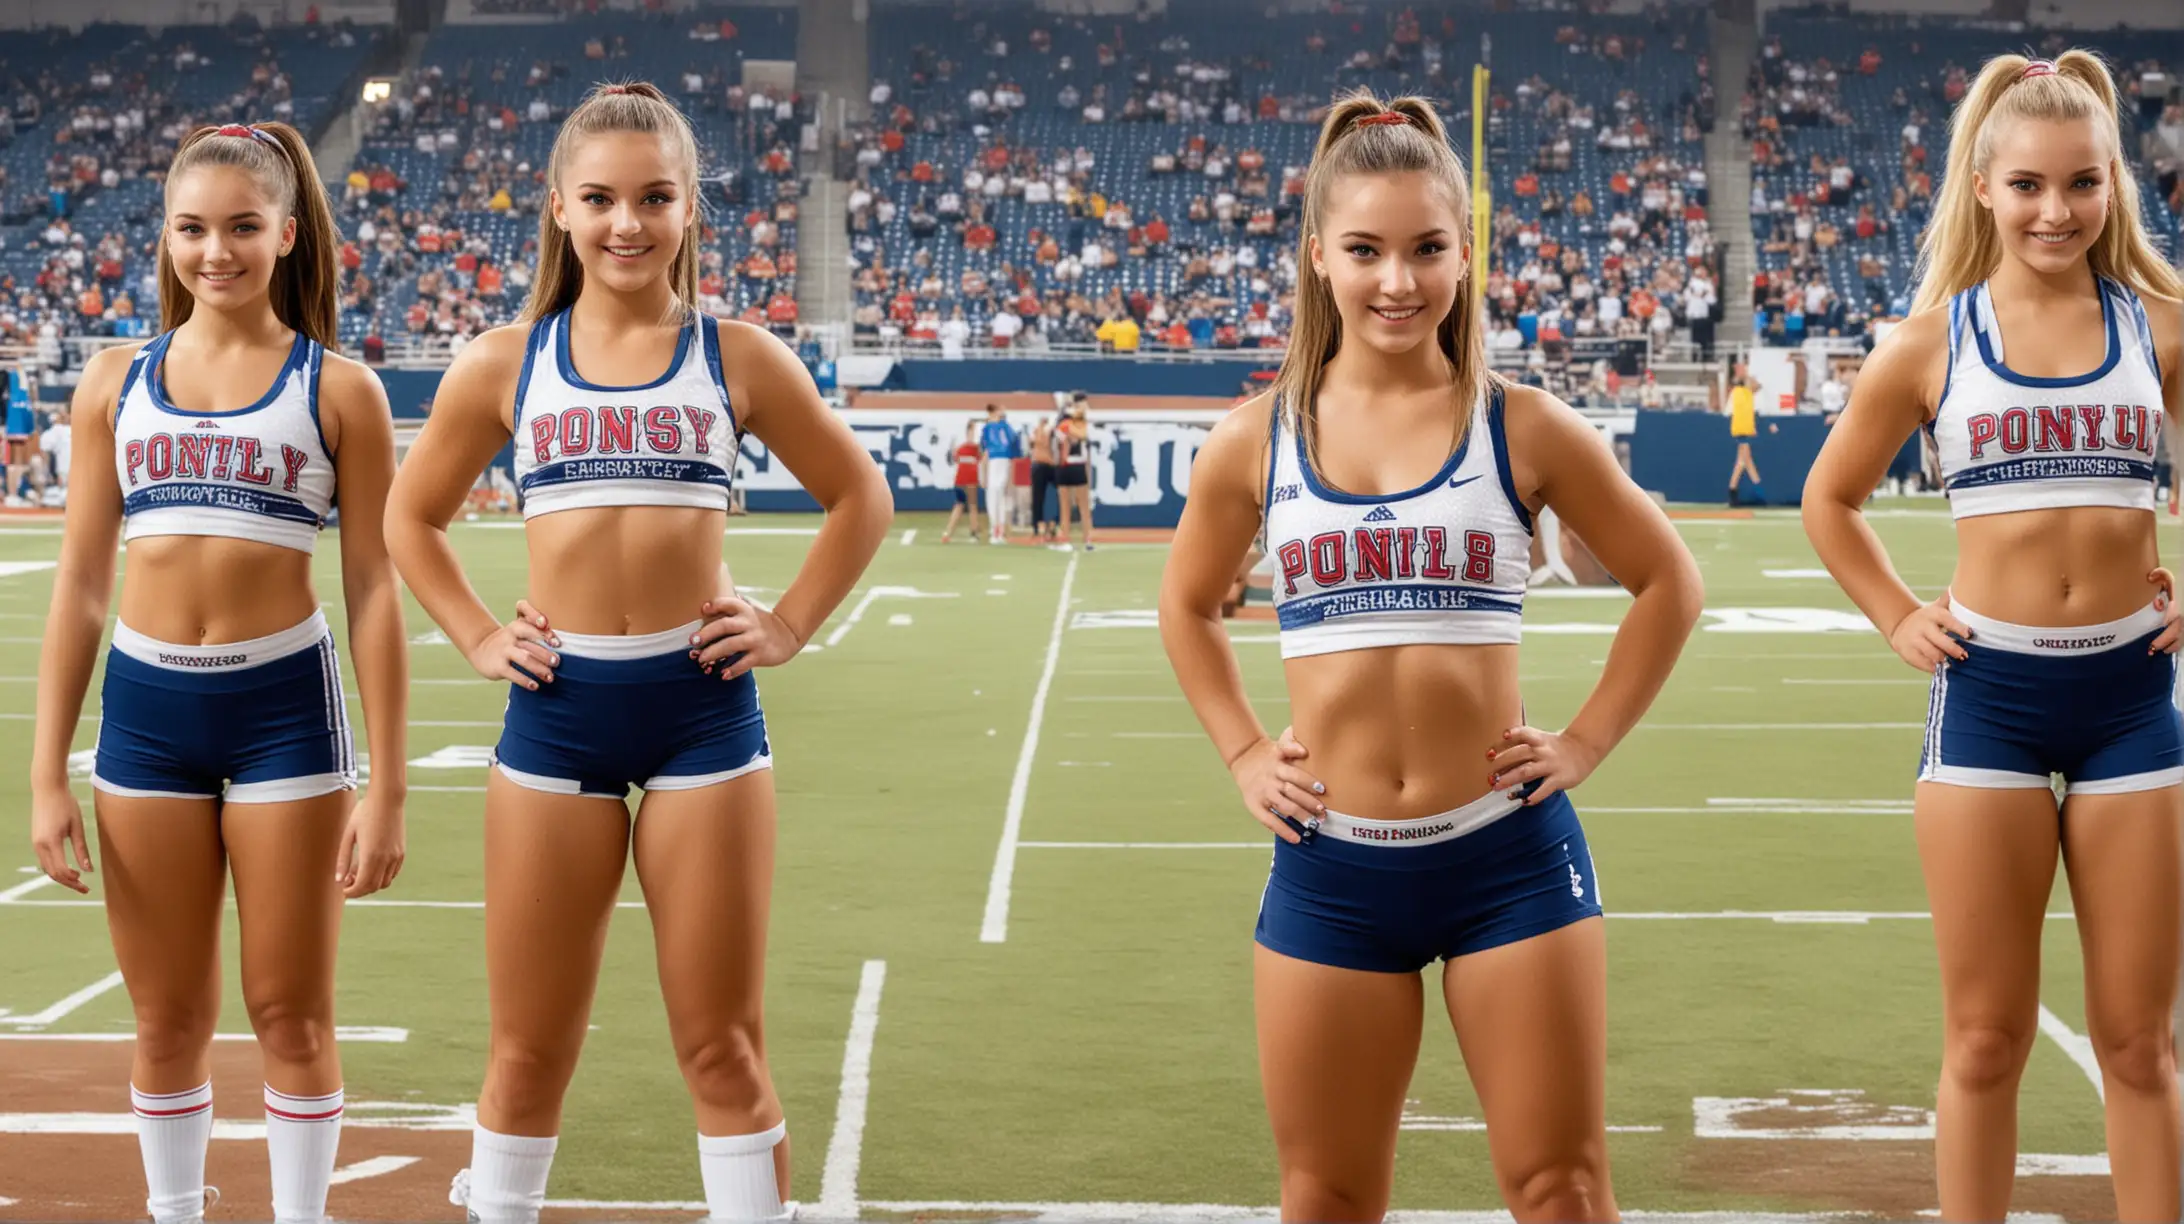 Young Cheerleaders in Bike Shorts and Crop Tops at Sports Stadium